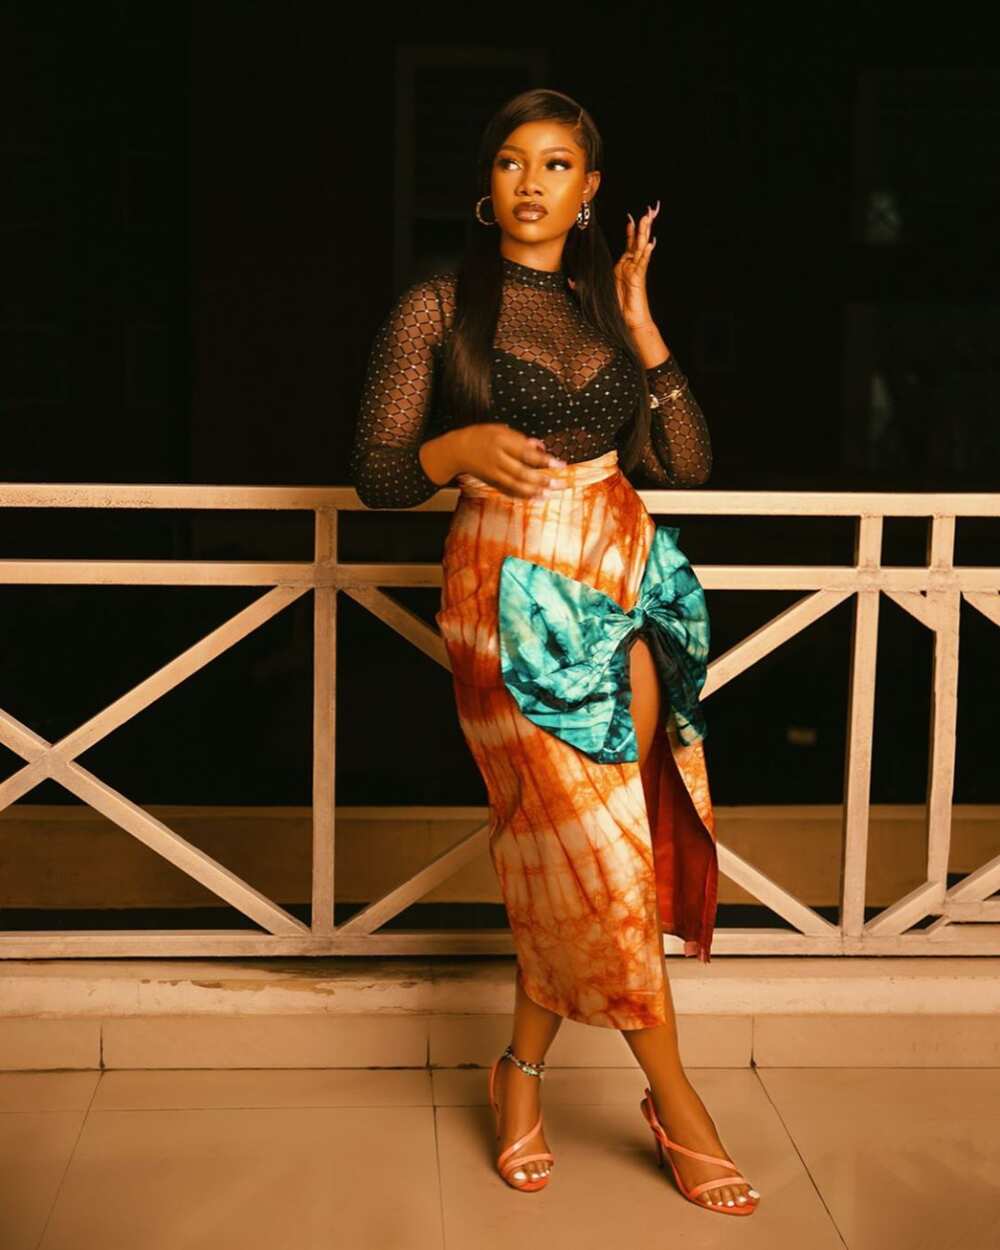 BBNaija 2019 star Tacha claims she is a mother, shares photos and video of little girl